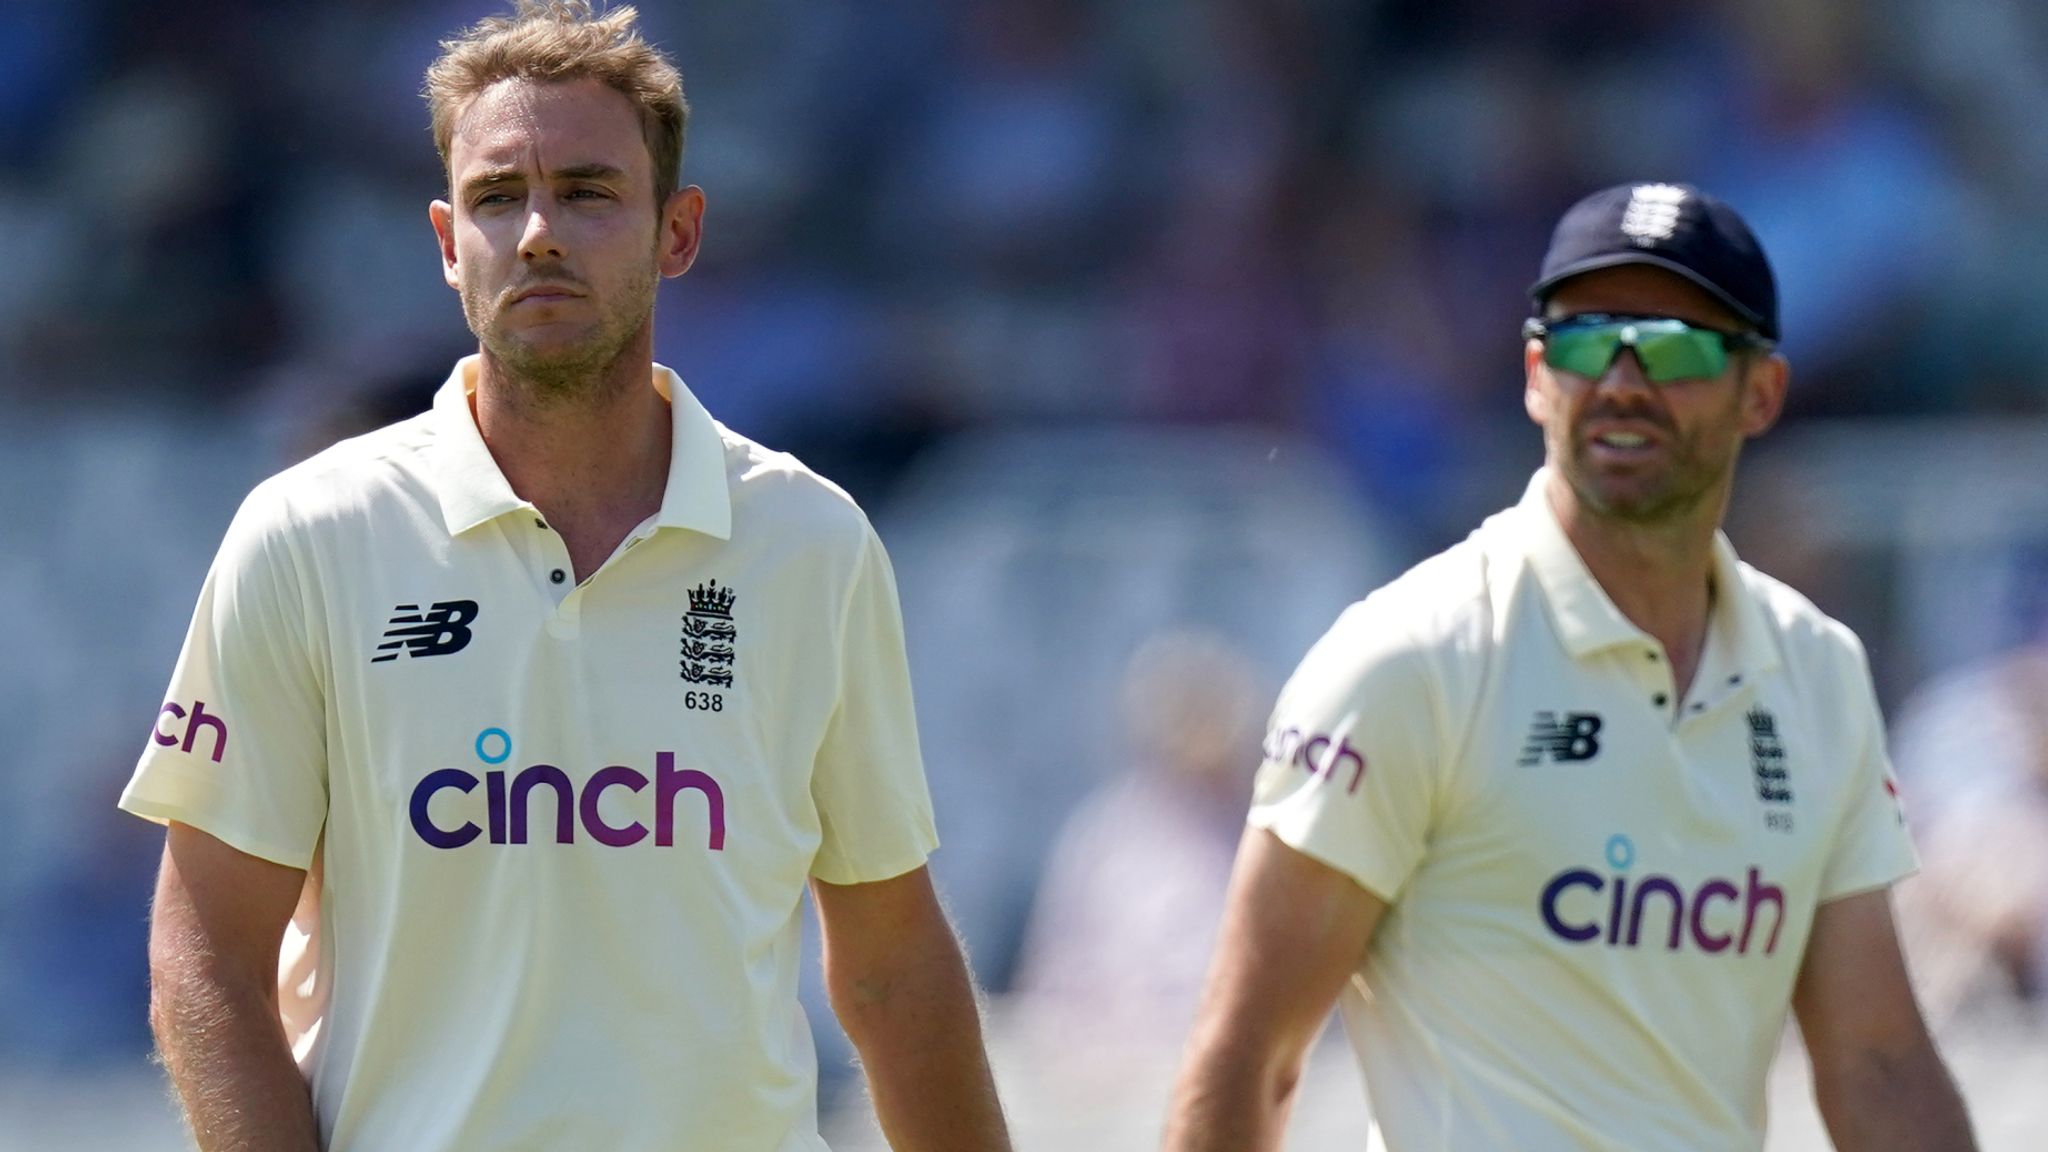 James Anderson and Stuart Broad of England. Photo- Skysports